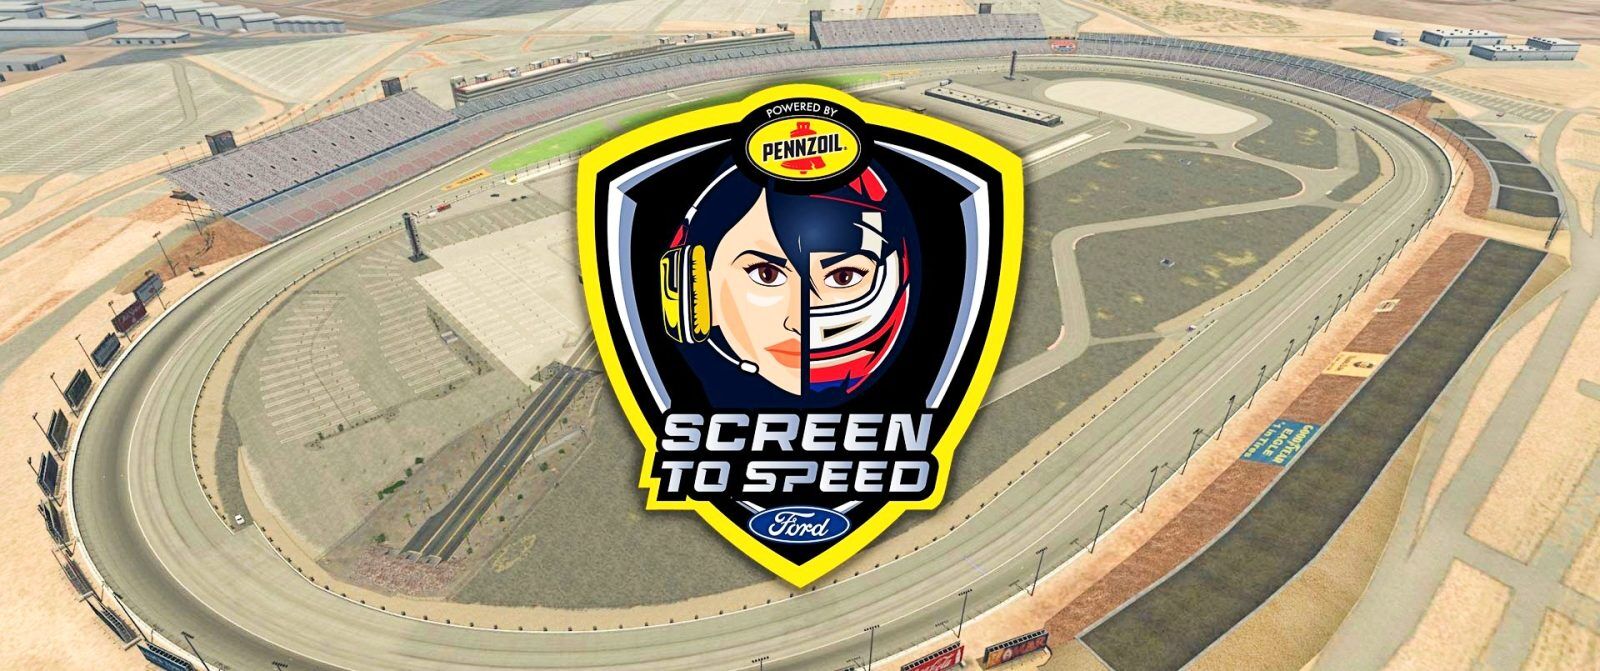 The Screen to Speed logo with half featuring a woman wearing a gaming headset and half featuring a woman wearing a racing helmet. In the background, the Las Vegas Motor Speedway on iRacing.